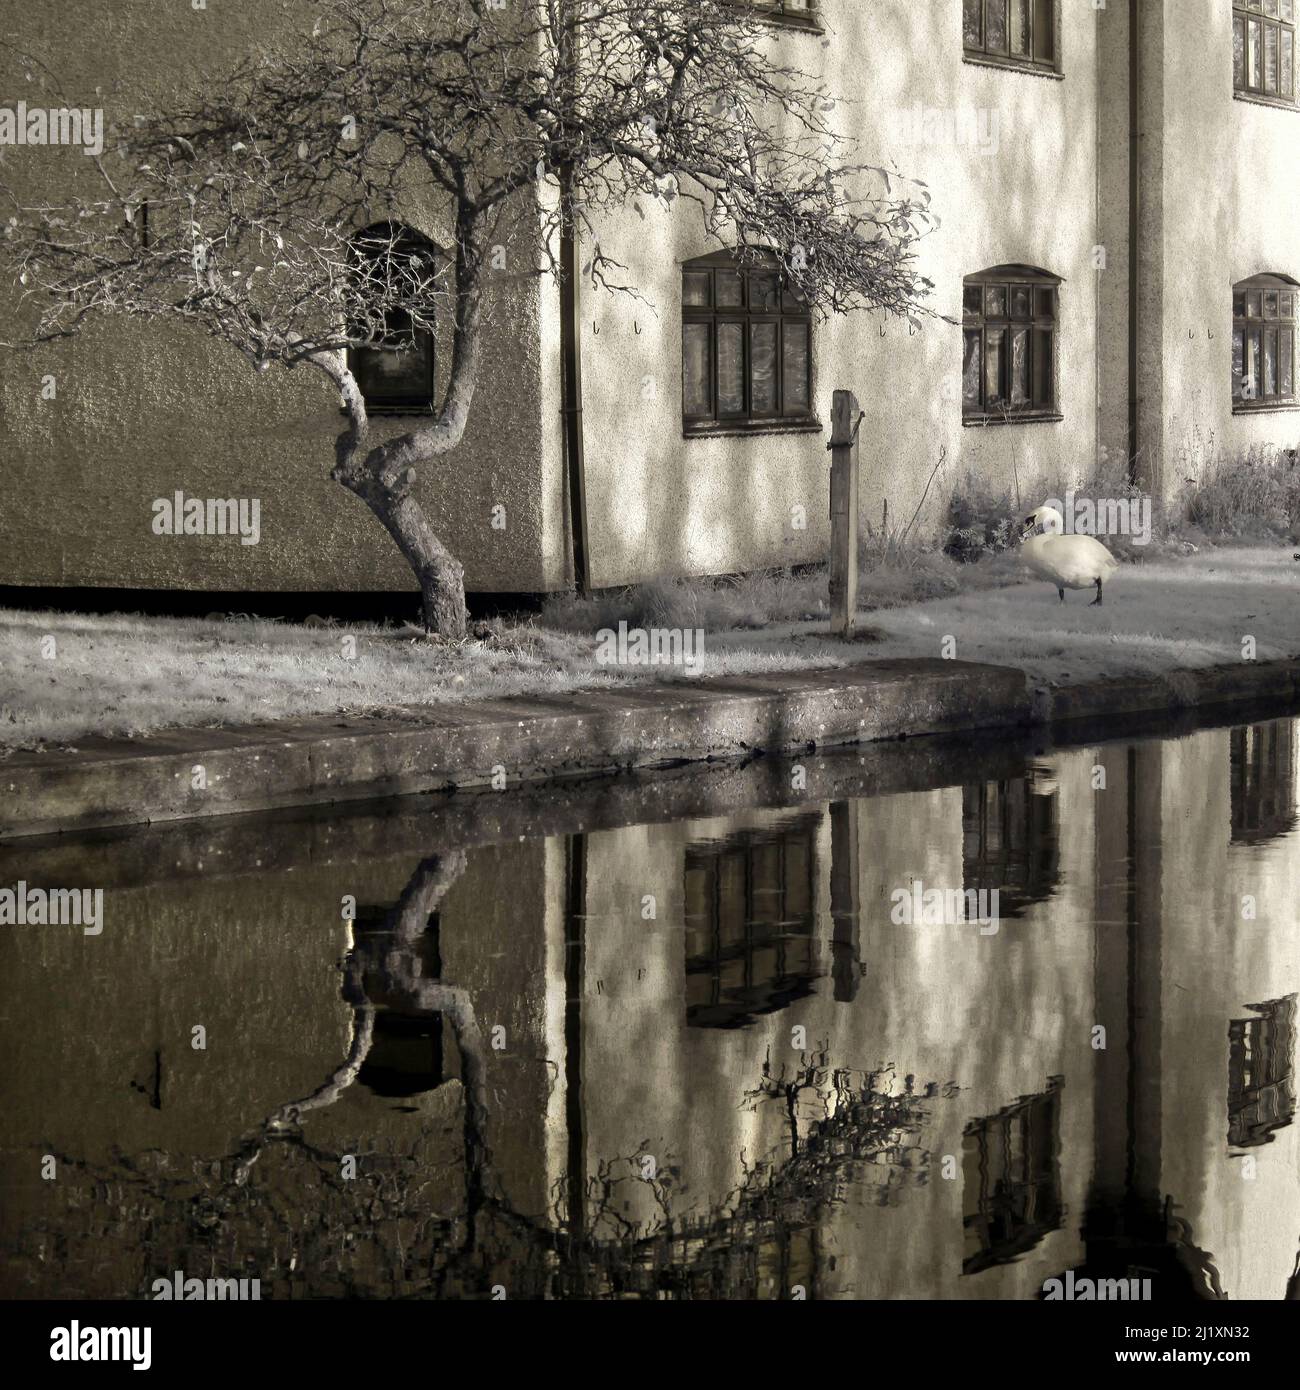 Black and white photograph of British Waterways canalside, showing a Sepia toned infrared image with light forms mirrored on the surface of water brin Stock Photo